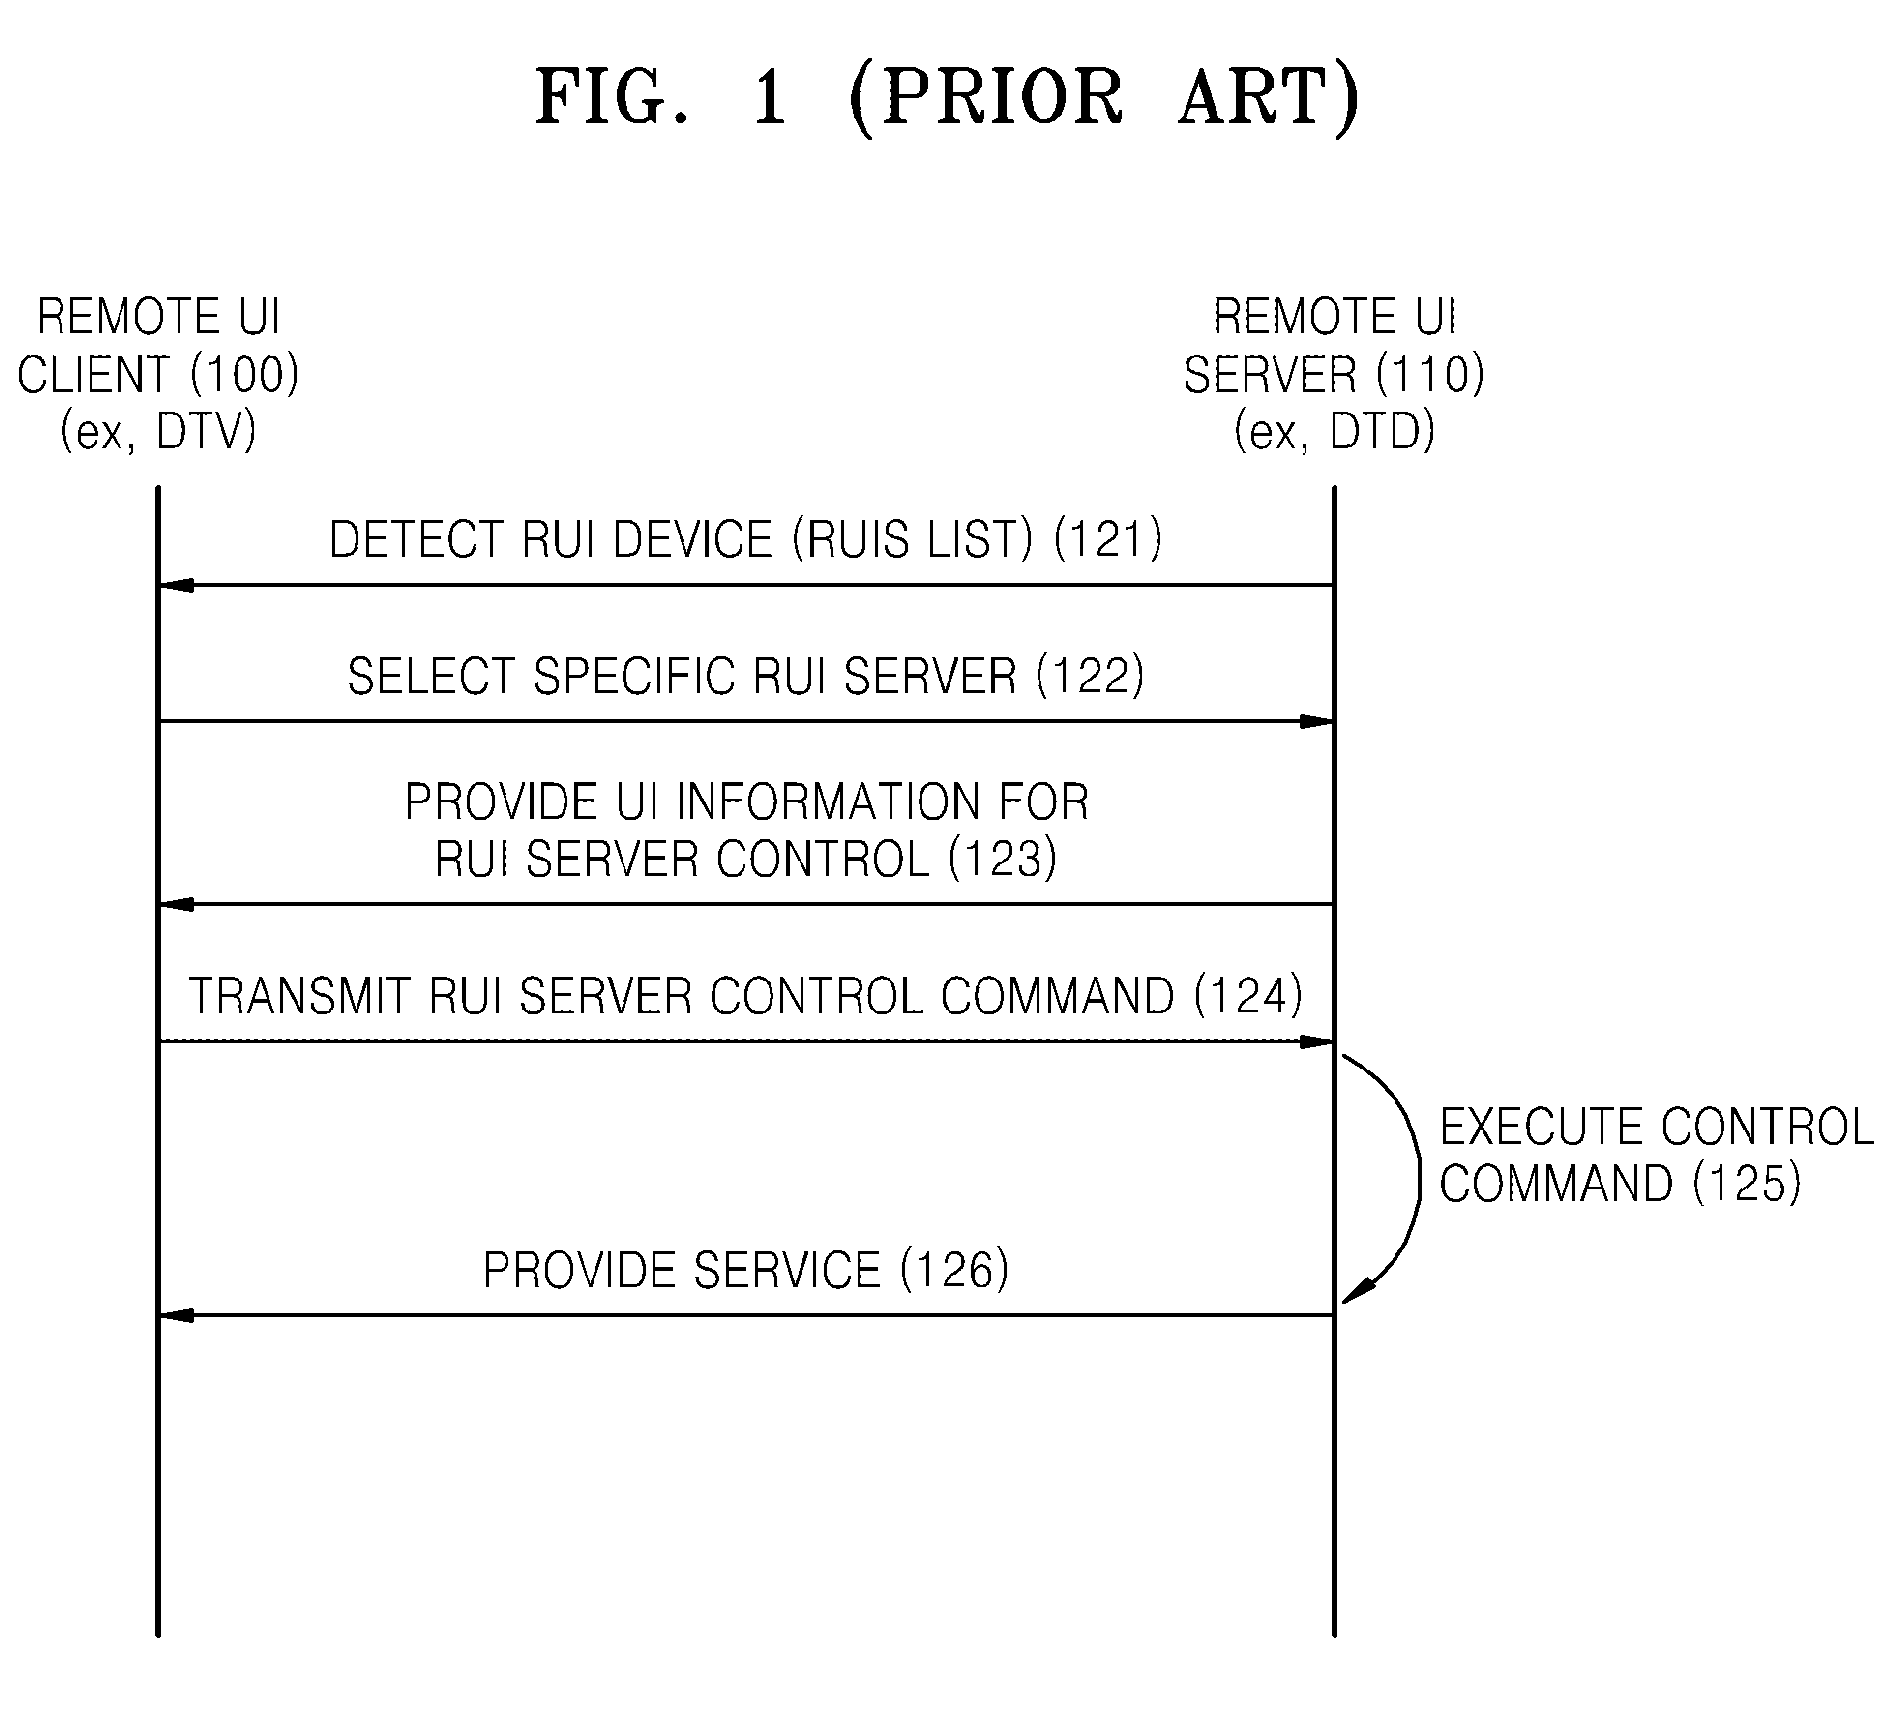 Home network device control service and/or internet service method and apparatus thereof